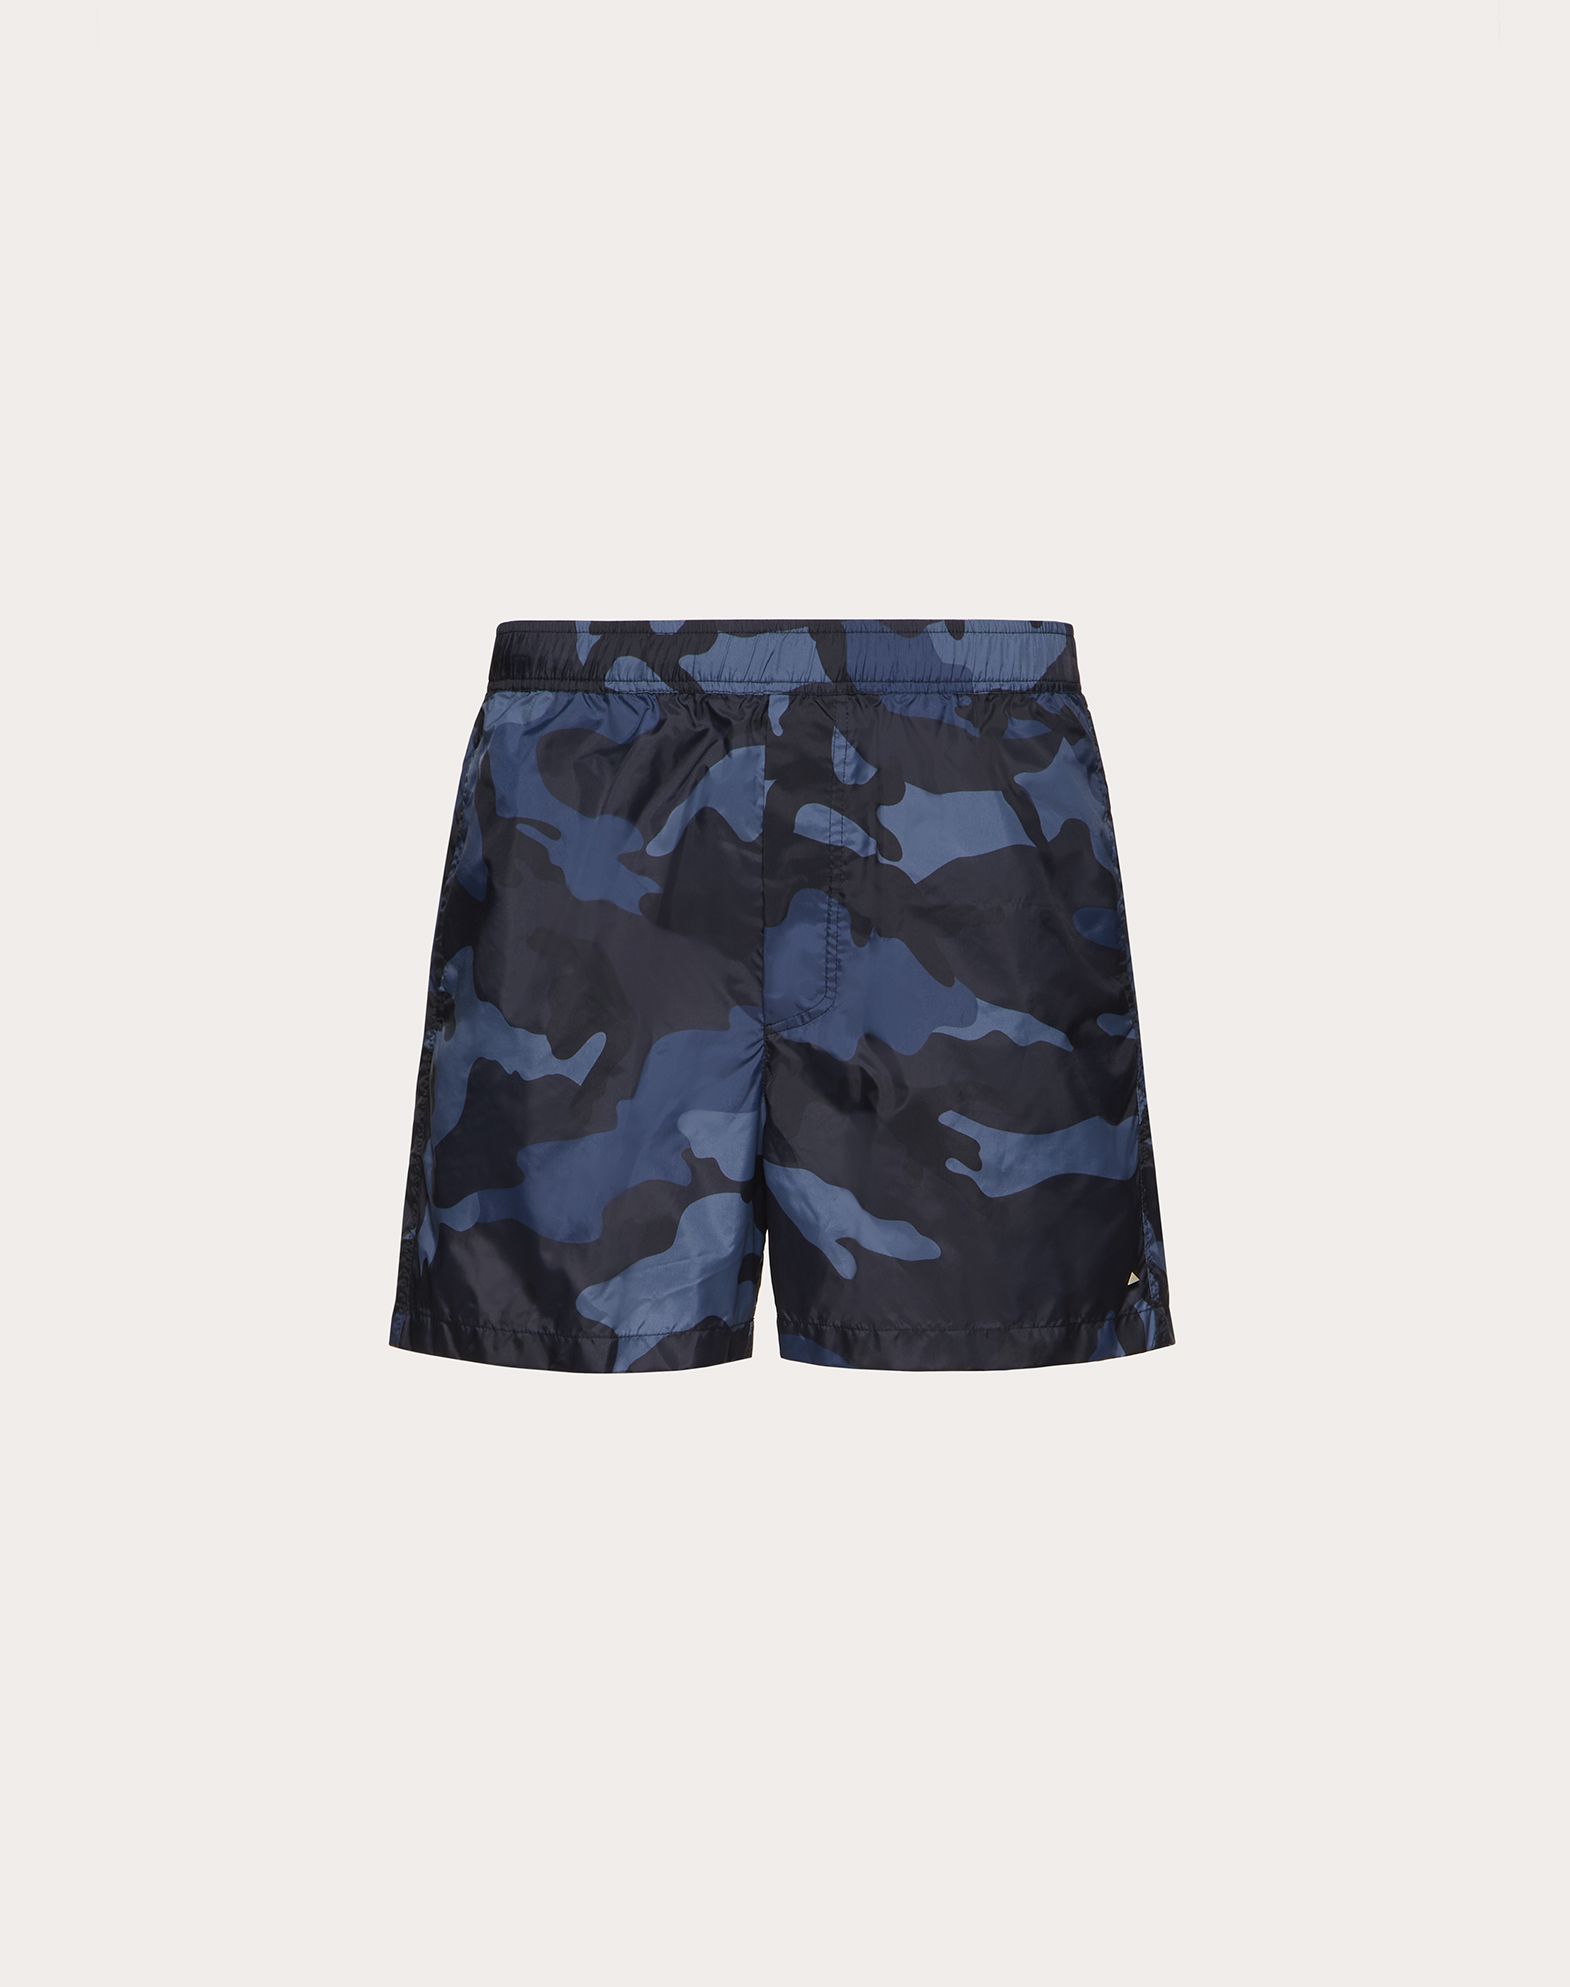 Valentino Uomo Camouflage Bathing Suit In Navy Camo/air Force Blue